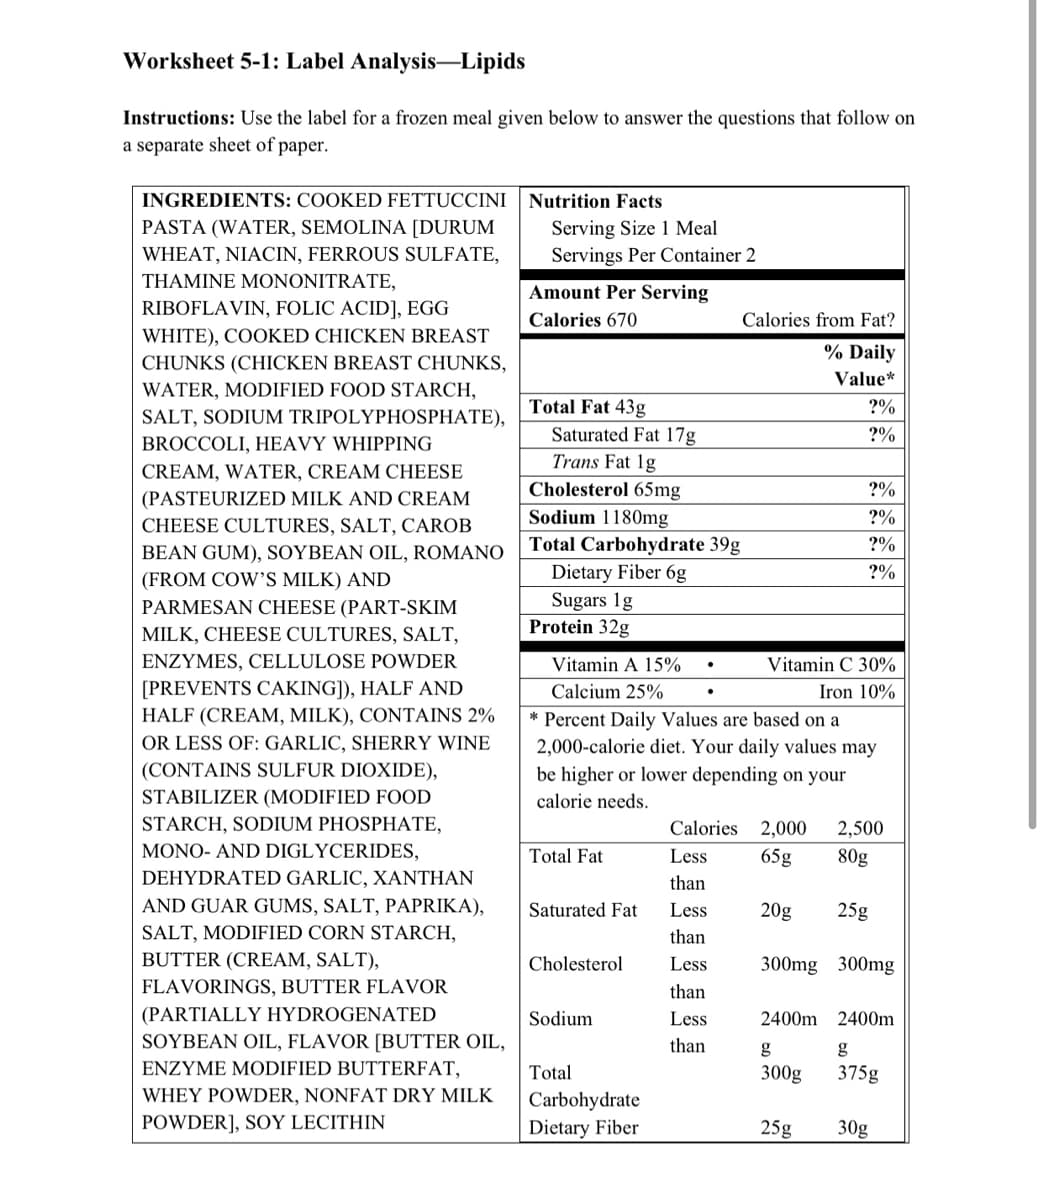 Worksheet 5-1: Label Analysis-Lipids
Instructions: Use the label for a frozen meal given below to answer the questions that follow on
a separate sheet of paper.
INGREDIENTS: COOKED FETTUCCINI
Nutrition Facts
Serving Size 1 Meal
Servings Per Container 2
PASTA (WATER, SEMOLINA [DURUM
WHEAT, NIACIN, FERROUS SULFATE,
THAMINE MONONITRATE,
Amount Per Serving
RIBOFLAVIN, FOLIC ACID], EGG
WHITE), COOKED CHICKEN BREAST
Calories 670
Calories from Fat?
% Daily
CHUNKS (CHICKEN BREAST CHUNKS,
Value*
WATER, MODIFIED FOOD STARCH,
Total Fat 43g
?%
SALT, SODIUM TRIPOLYPHOSPHATE),
Saturated Fat 17g
Trans Fat 1g
?%
BROCCOLI, HEAVY WHIPPING
CREAM, WATER, CREAM CHEESE
(PASTEURIZED MILK AND CREAM
CHEESE CULTURES, SALT, CAROB
Cholesterol 65mg
Sodium 1180mg
Total Carbohydrate 39g
?%
BEAN GUM), SOYBEAN OIL, ROMANO
(FROM COW'S MILK) AND
PARMESAN CHEESE (PART-SKIM
Dietary Fiber 6g
Sugars 1g
Protein 32g
?%
MILK, CHEESE CULTURES, SALT,
ENZYMES, CELLULOSE POWDER
Vitamin A 15%
Vitamin C 30%
[PREVENTS CAKING]), HALF AND
HALF (CREAM, MILK), CONTAINS 2%
Calcium 25%
Iron 10%
Percent Daily Values are based on a
2,000-calorie diet. Your daily values may
OR LESS OF: GARLIC, SHERRY WINE
(CONTAINS SULFUR DIOXIDE),
be higher or lower depending on your
STABILIZER (MODIFIED FOOD
calorie needs.
STARCH, SODIUM PHOSPHATE,
Calories 2,000
2,500
MONO- AND DIGLYCERIDES,
Total Fat
Less
65g
80g
DEHYDRATED GARLIC, XANTHAN
than
AND GUAR GUMS, SALT, PAPRIKA),
Saturated Fat
Less
20g
25g
SALT, MODIFIED CORN STARCH,
than
BUTTER (CREAM, SALT),
Cholesterol
Less
300mg 300mg
FLAVORINGS, BUTTER FLAVOR
than
(PARTIALLY HYDROGENATED
Sodium
Less
2400m 2400m
SOYBEAN OIL, FLAVOR [BUTTER OIL,
than
g
g
ENΖΥΜΕ MODIFIED BUTTERFAT,
Total
300g
375g
WHEY POWDER, NONFAT DRY MILK
Carbohydrate
Dietary Fiber
POWDER], SOY LECITHIN
25g
30g
